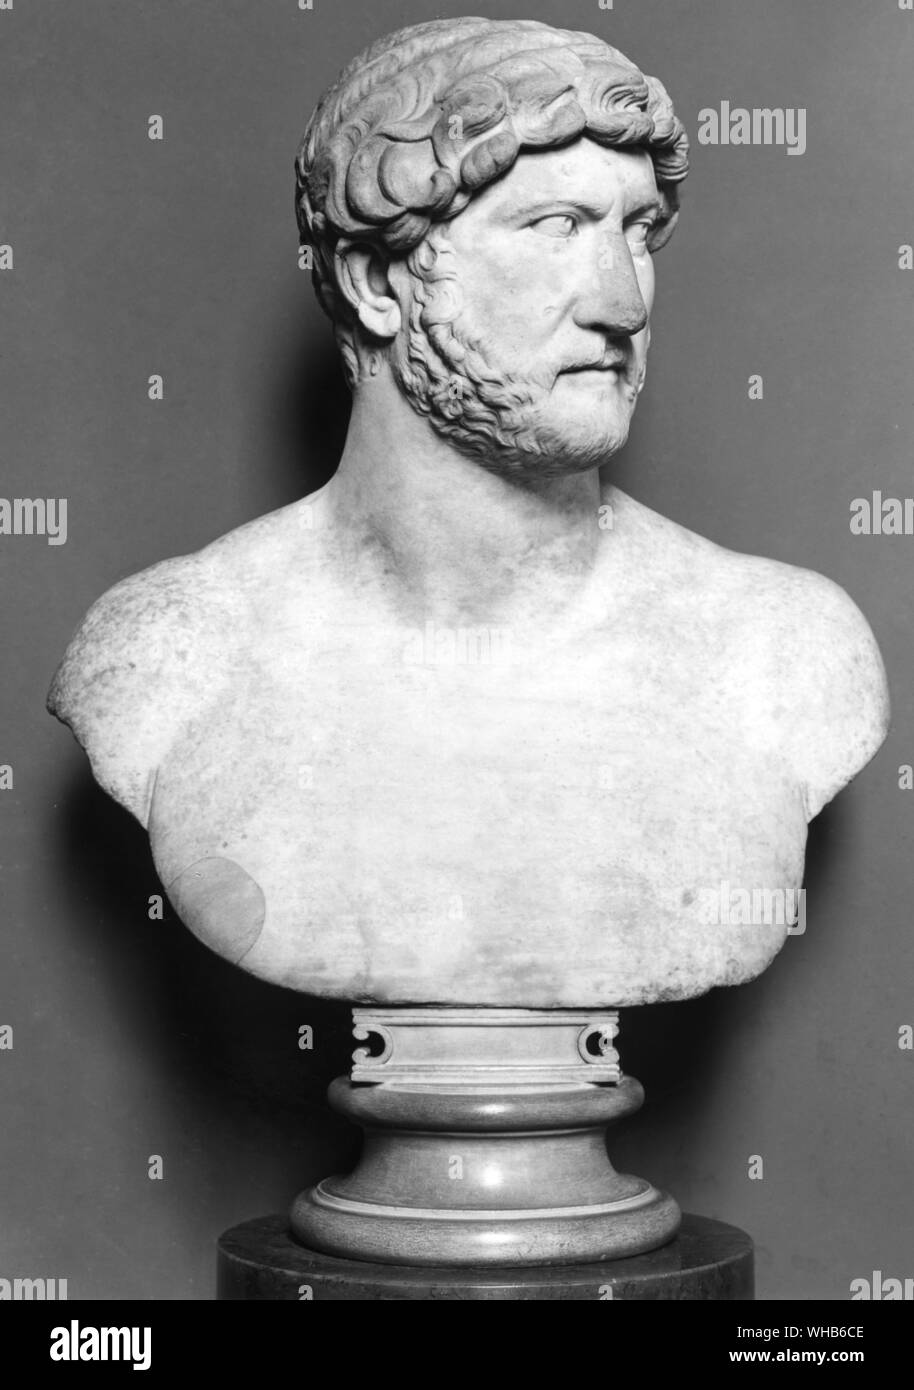 Bust of Hadrian - Publius Aelius Traianus Hadrianus (January 24, 76 - July 10, 138), known as Hadrian in English, was emperor of Rome from 117 A.D. to 138 A.D., as well as a Stoic and Epicurean philosopher. A member of the gens Aelia, Hadrian was the third of the Five Good Emperors. His reign had a faltering beginning, a glorious middle, and a tragic conclusion.. Stock Photo